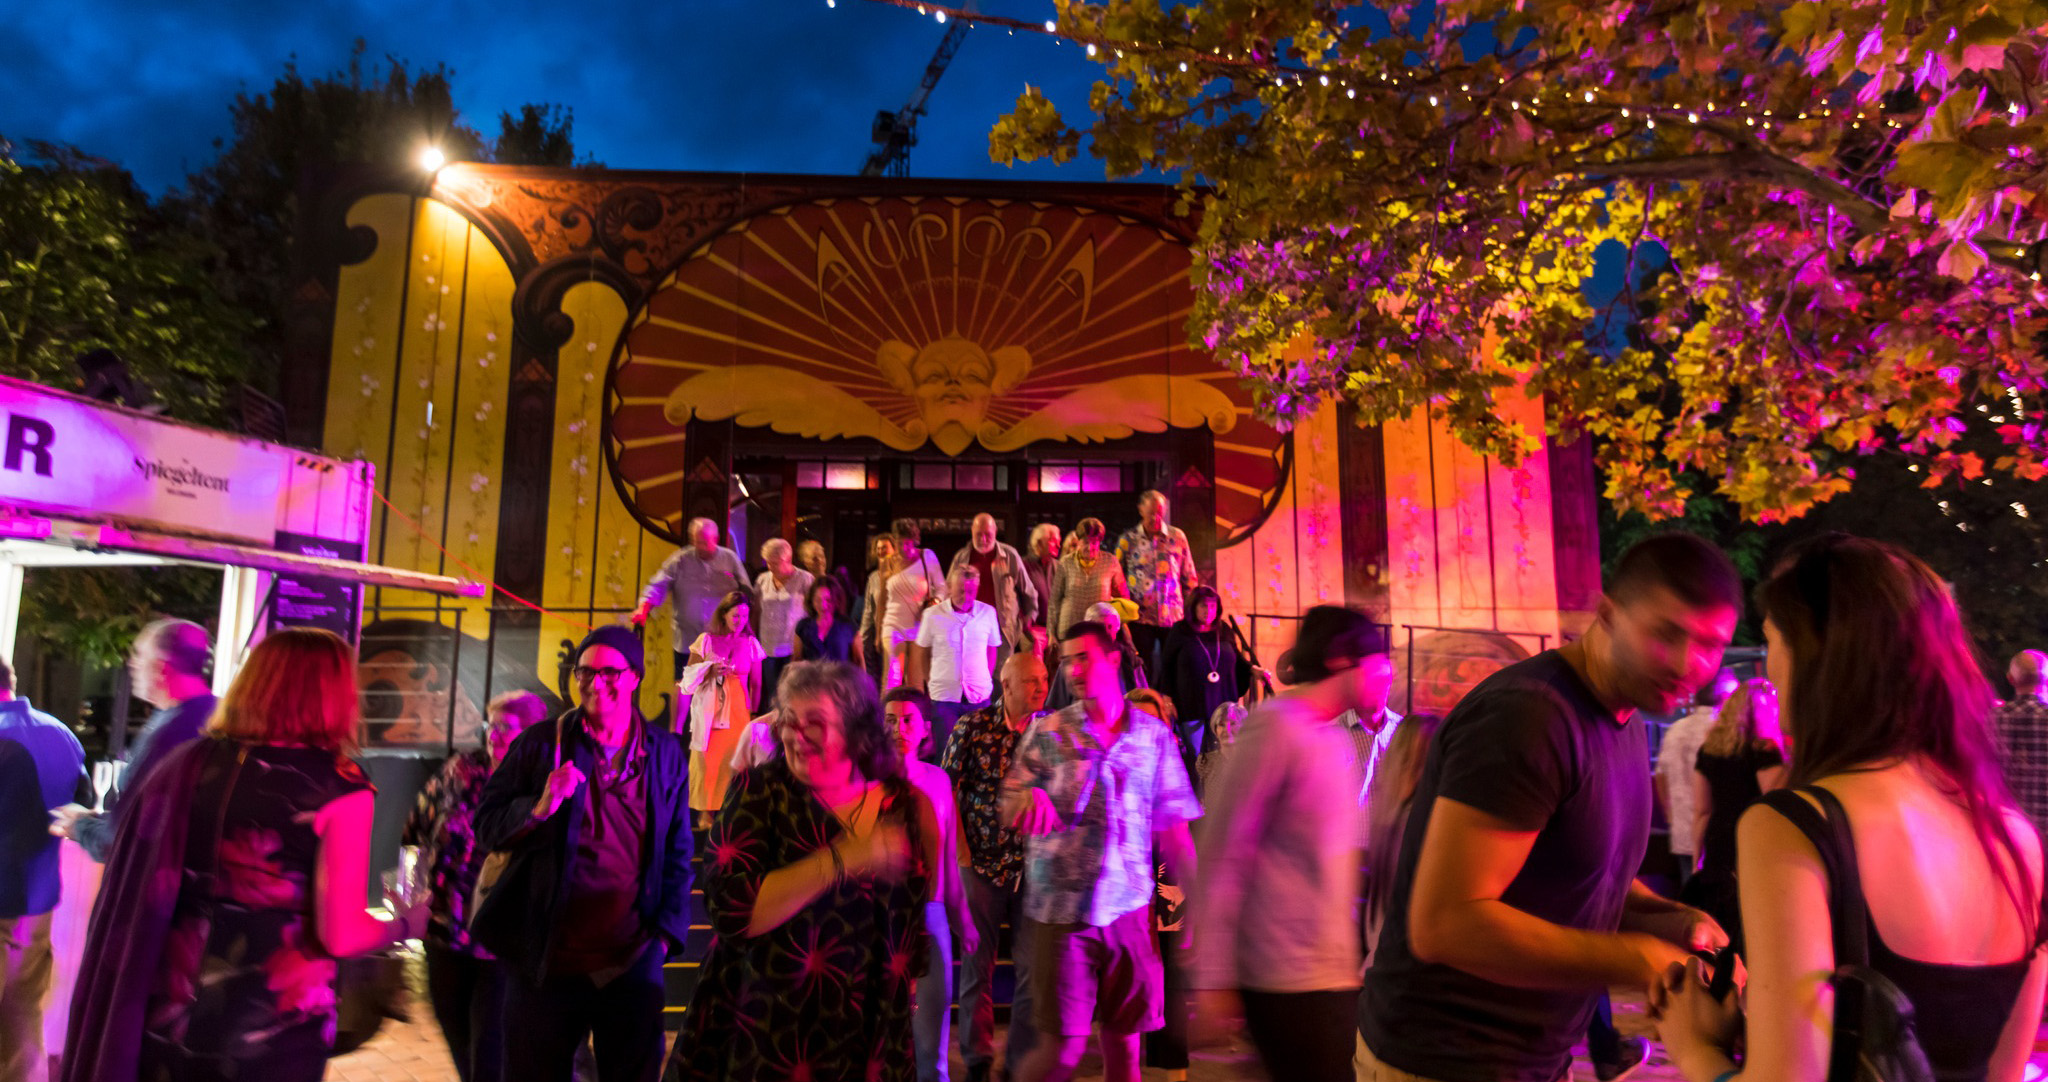 Waterfront Restaurants Street Food Spiegeltent Your Ultimate Nightlife Guide To Wollongong